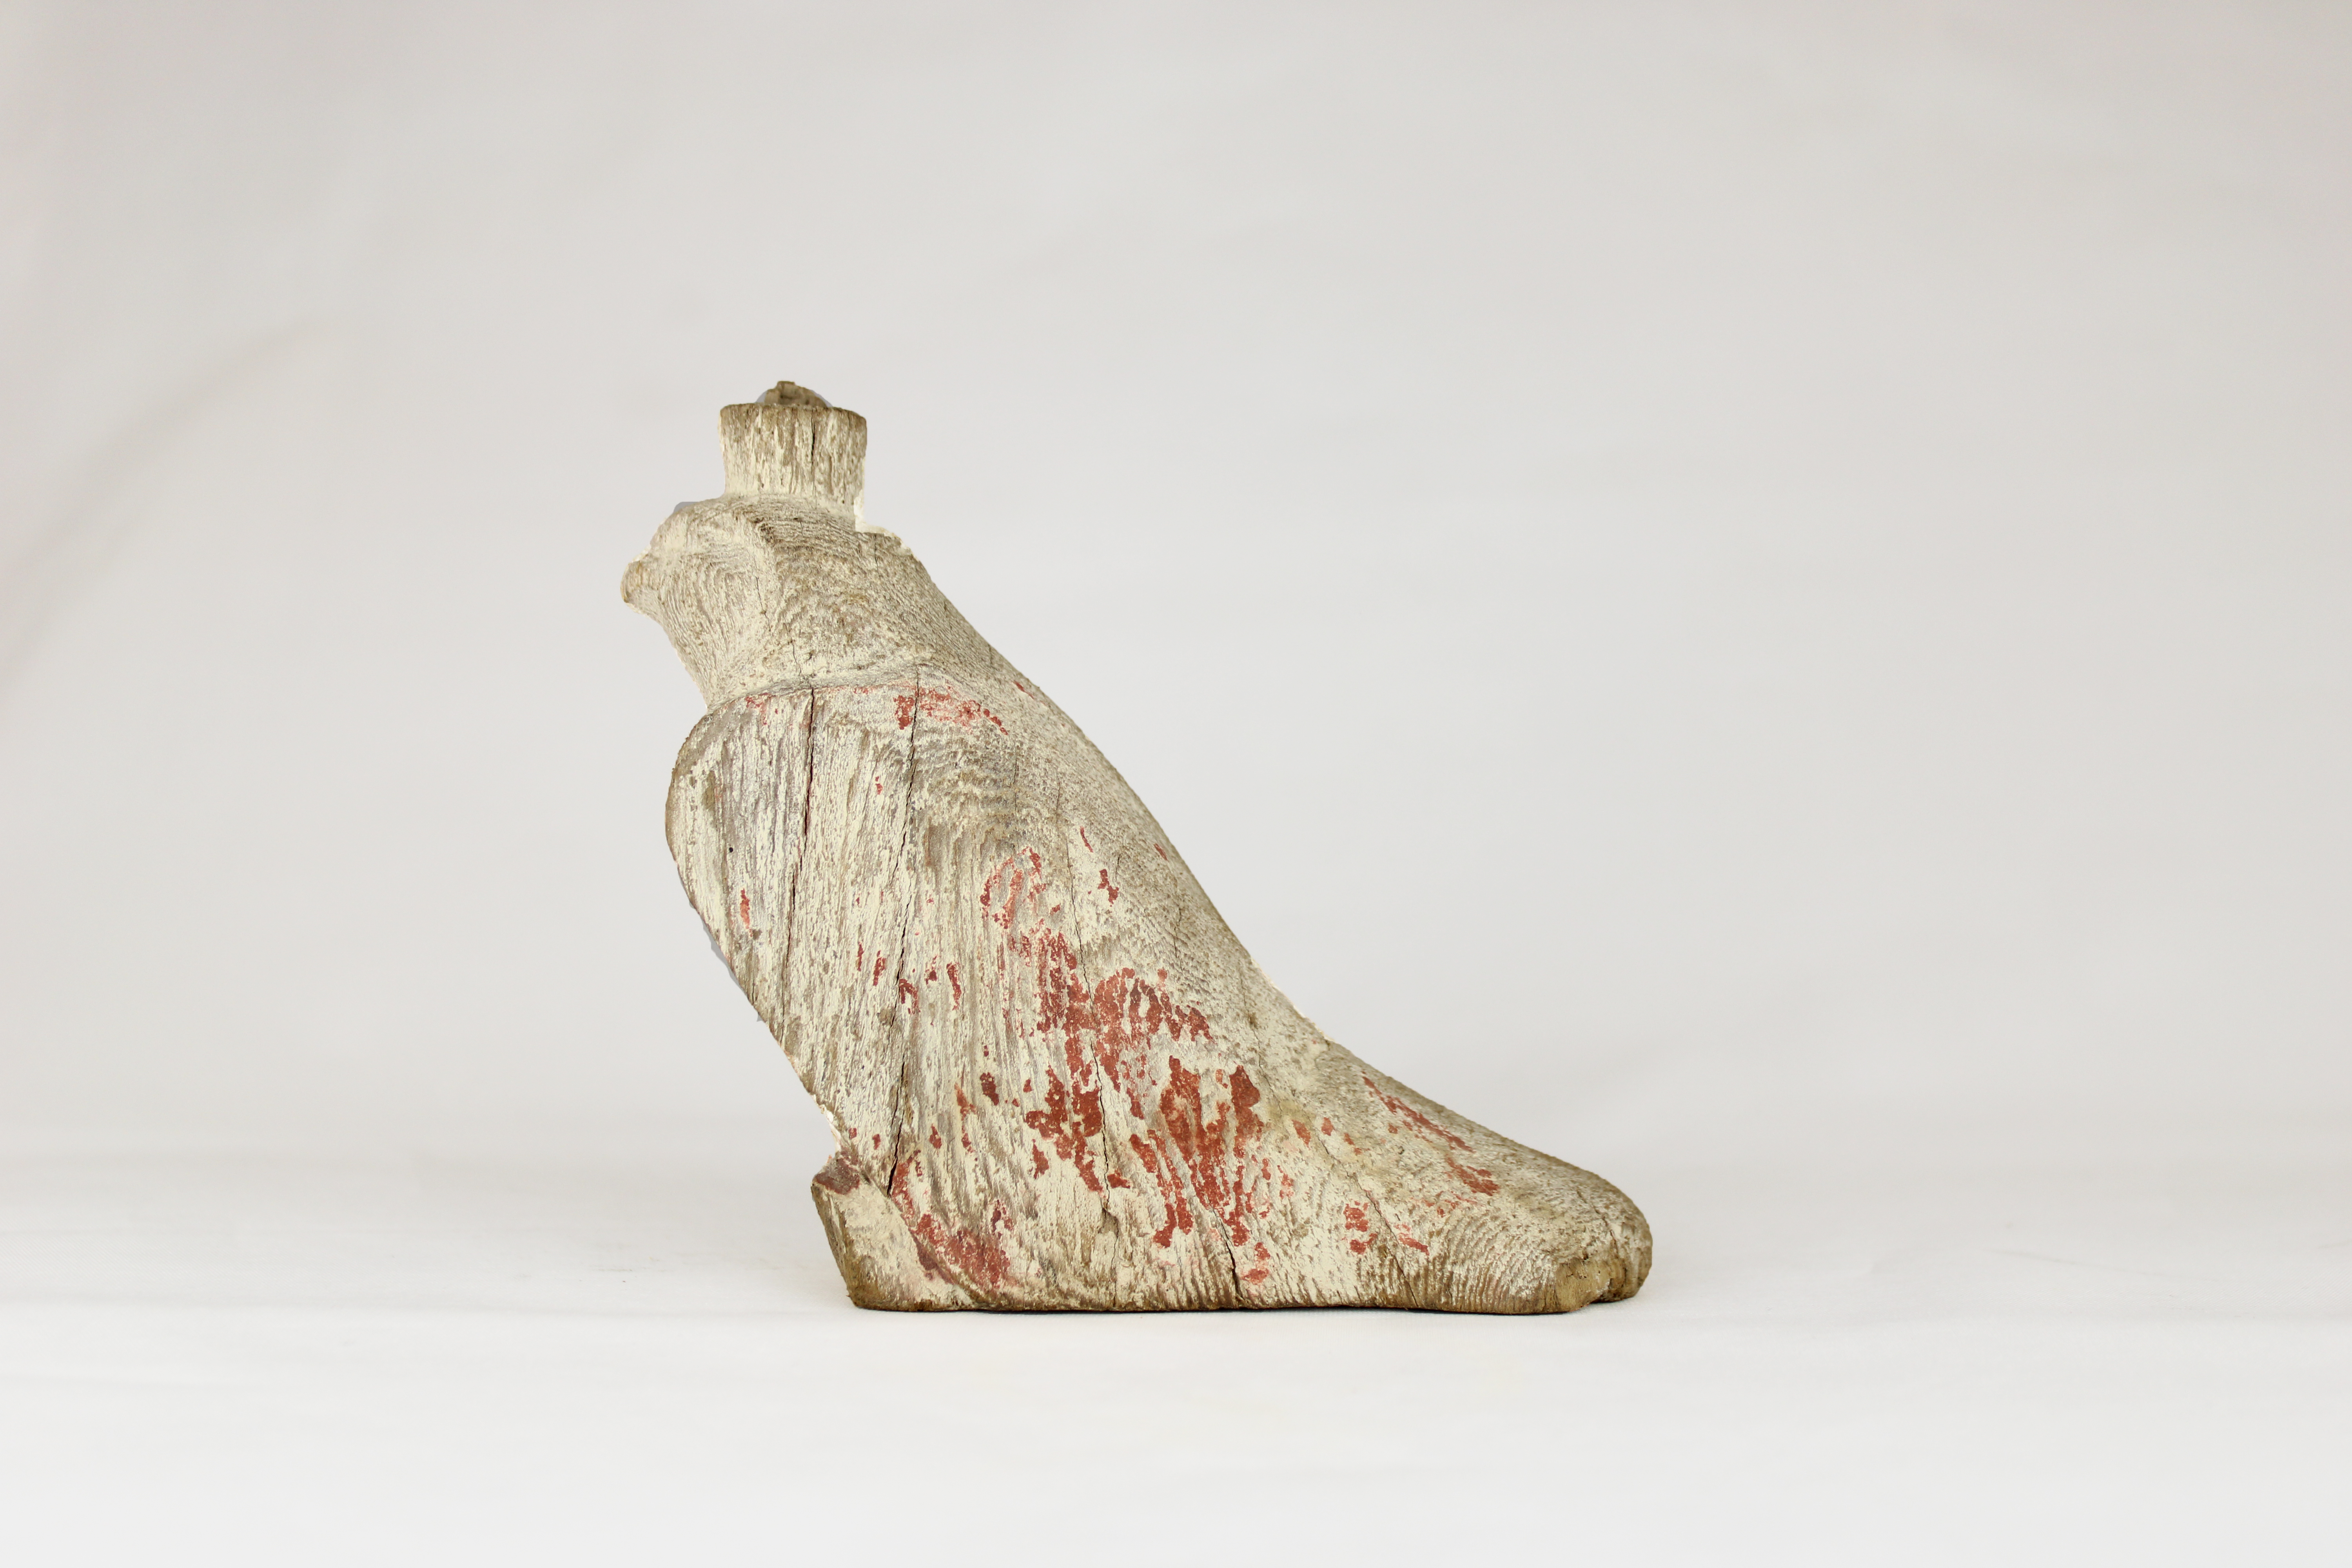 Image of a wooden figurine of a falcon, Egyptian, dating to between 2000 and 1500 BCE. Traces of reddish paint can be seen, especially on the lower portion of the body.